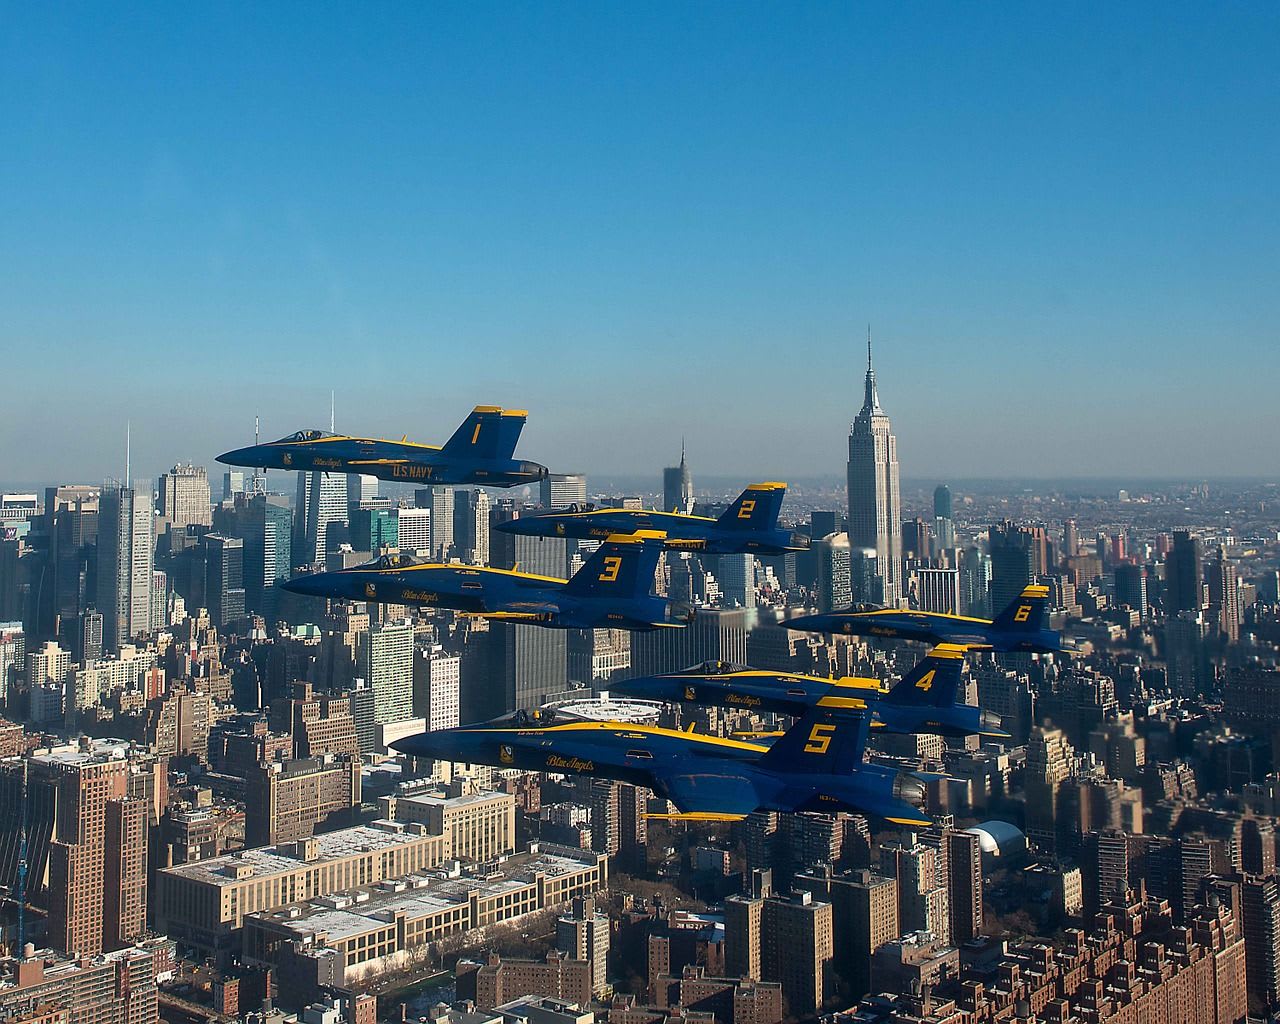 acrobatic aircraft in formation above a city